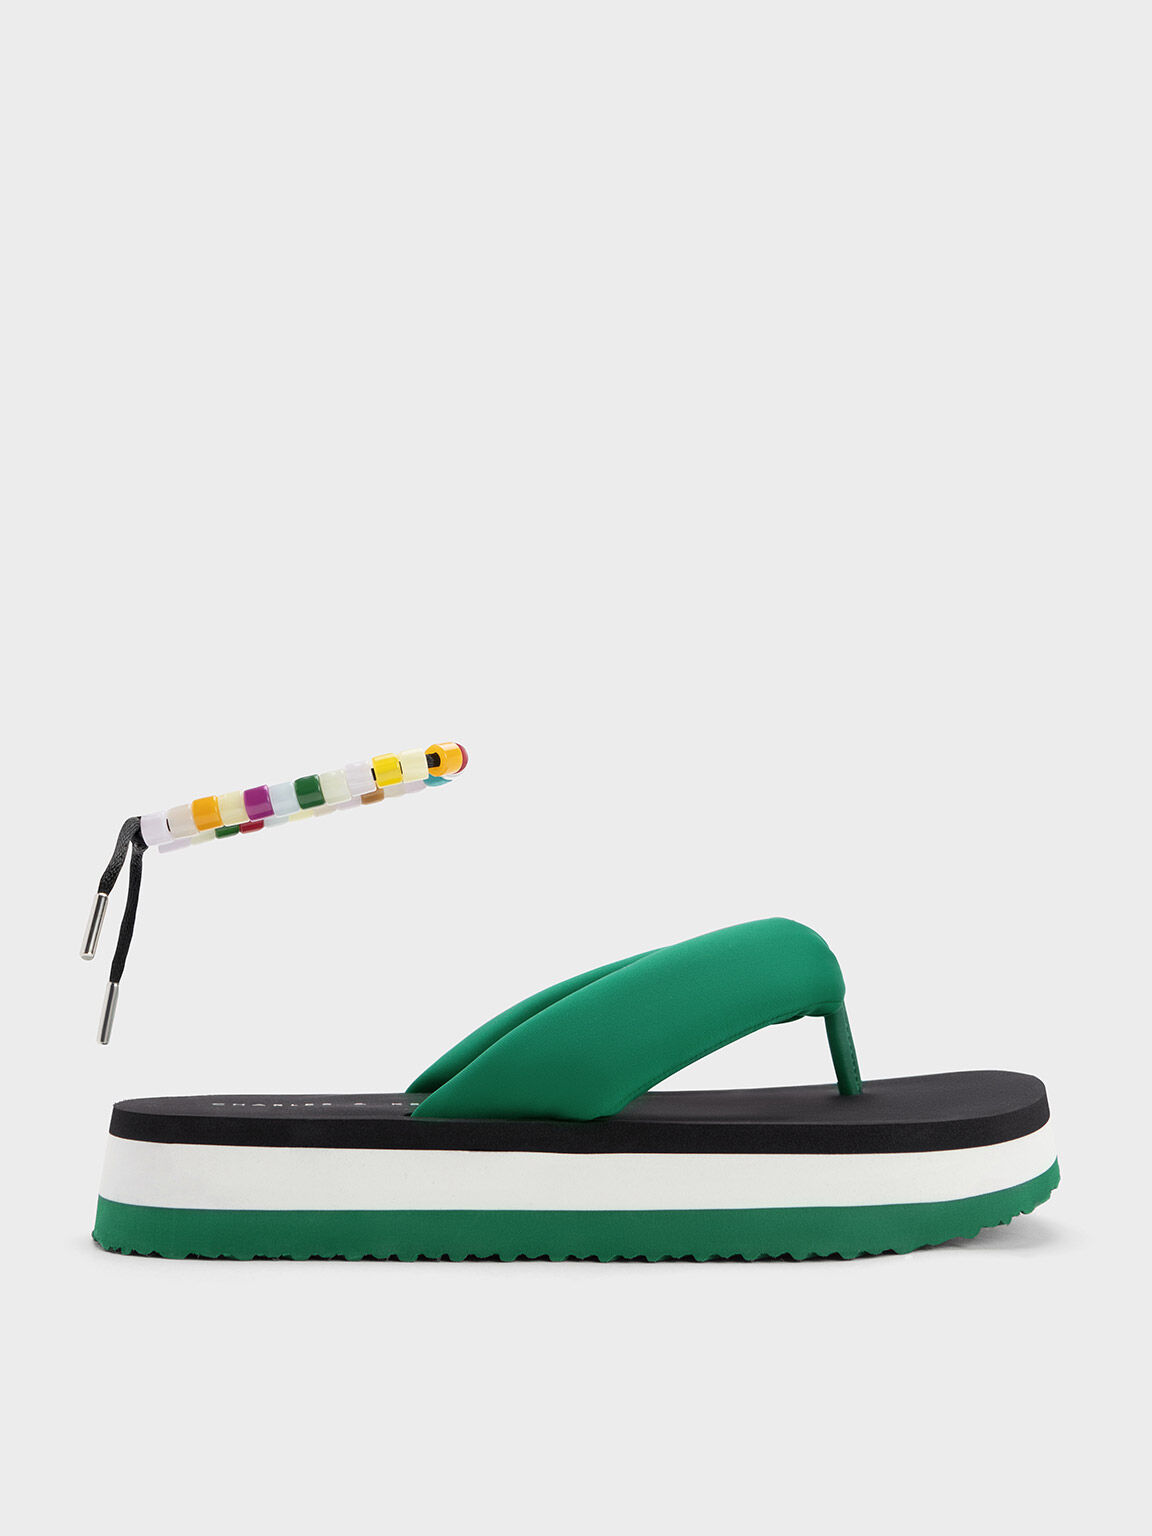 Green by Women Sandals from Charles Clinkard